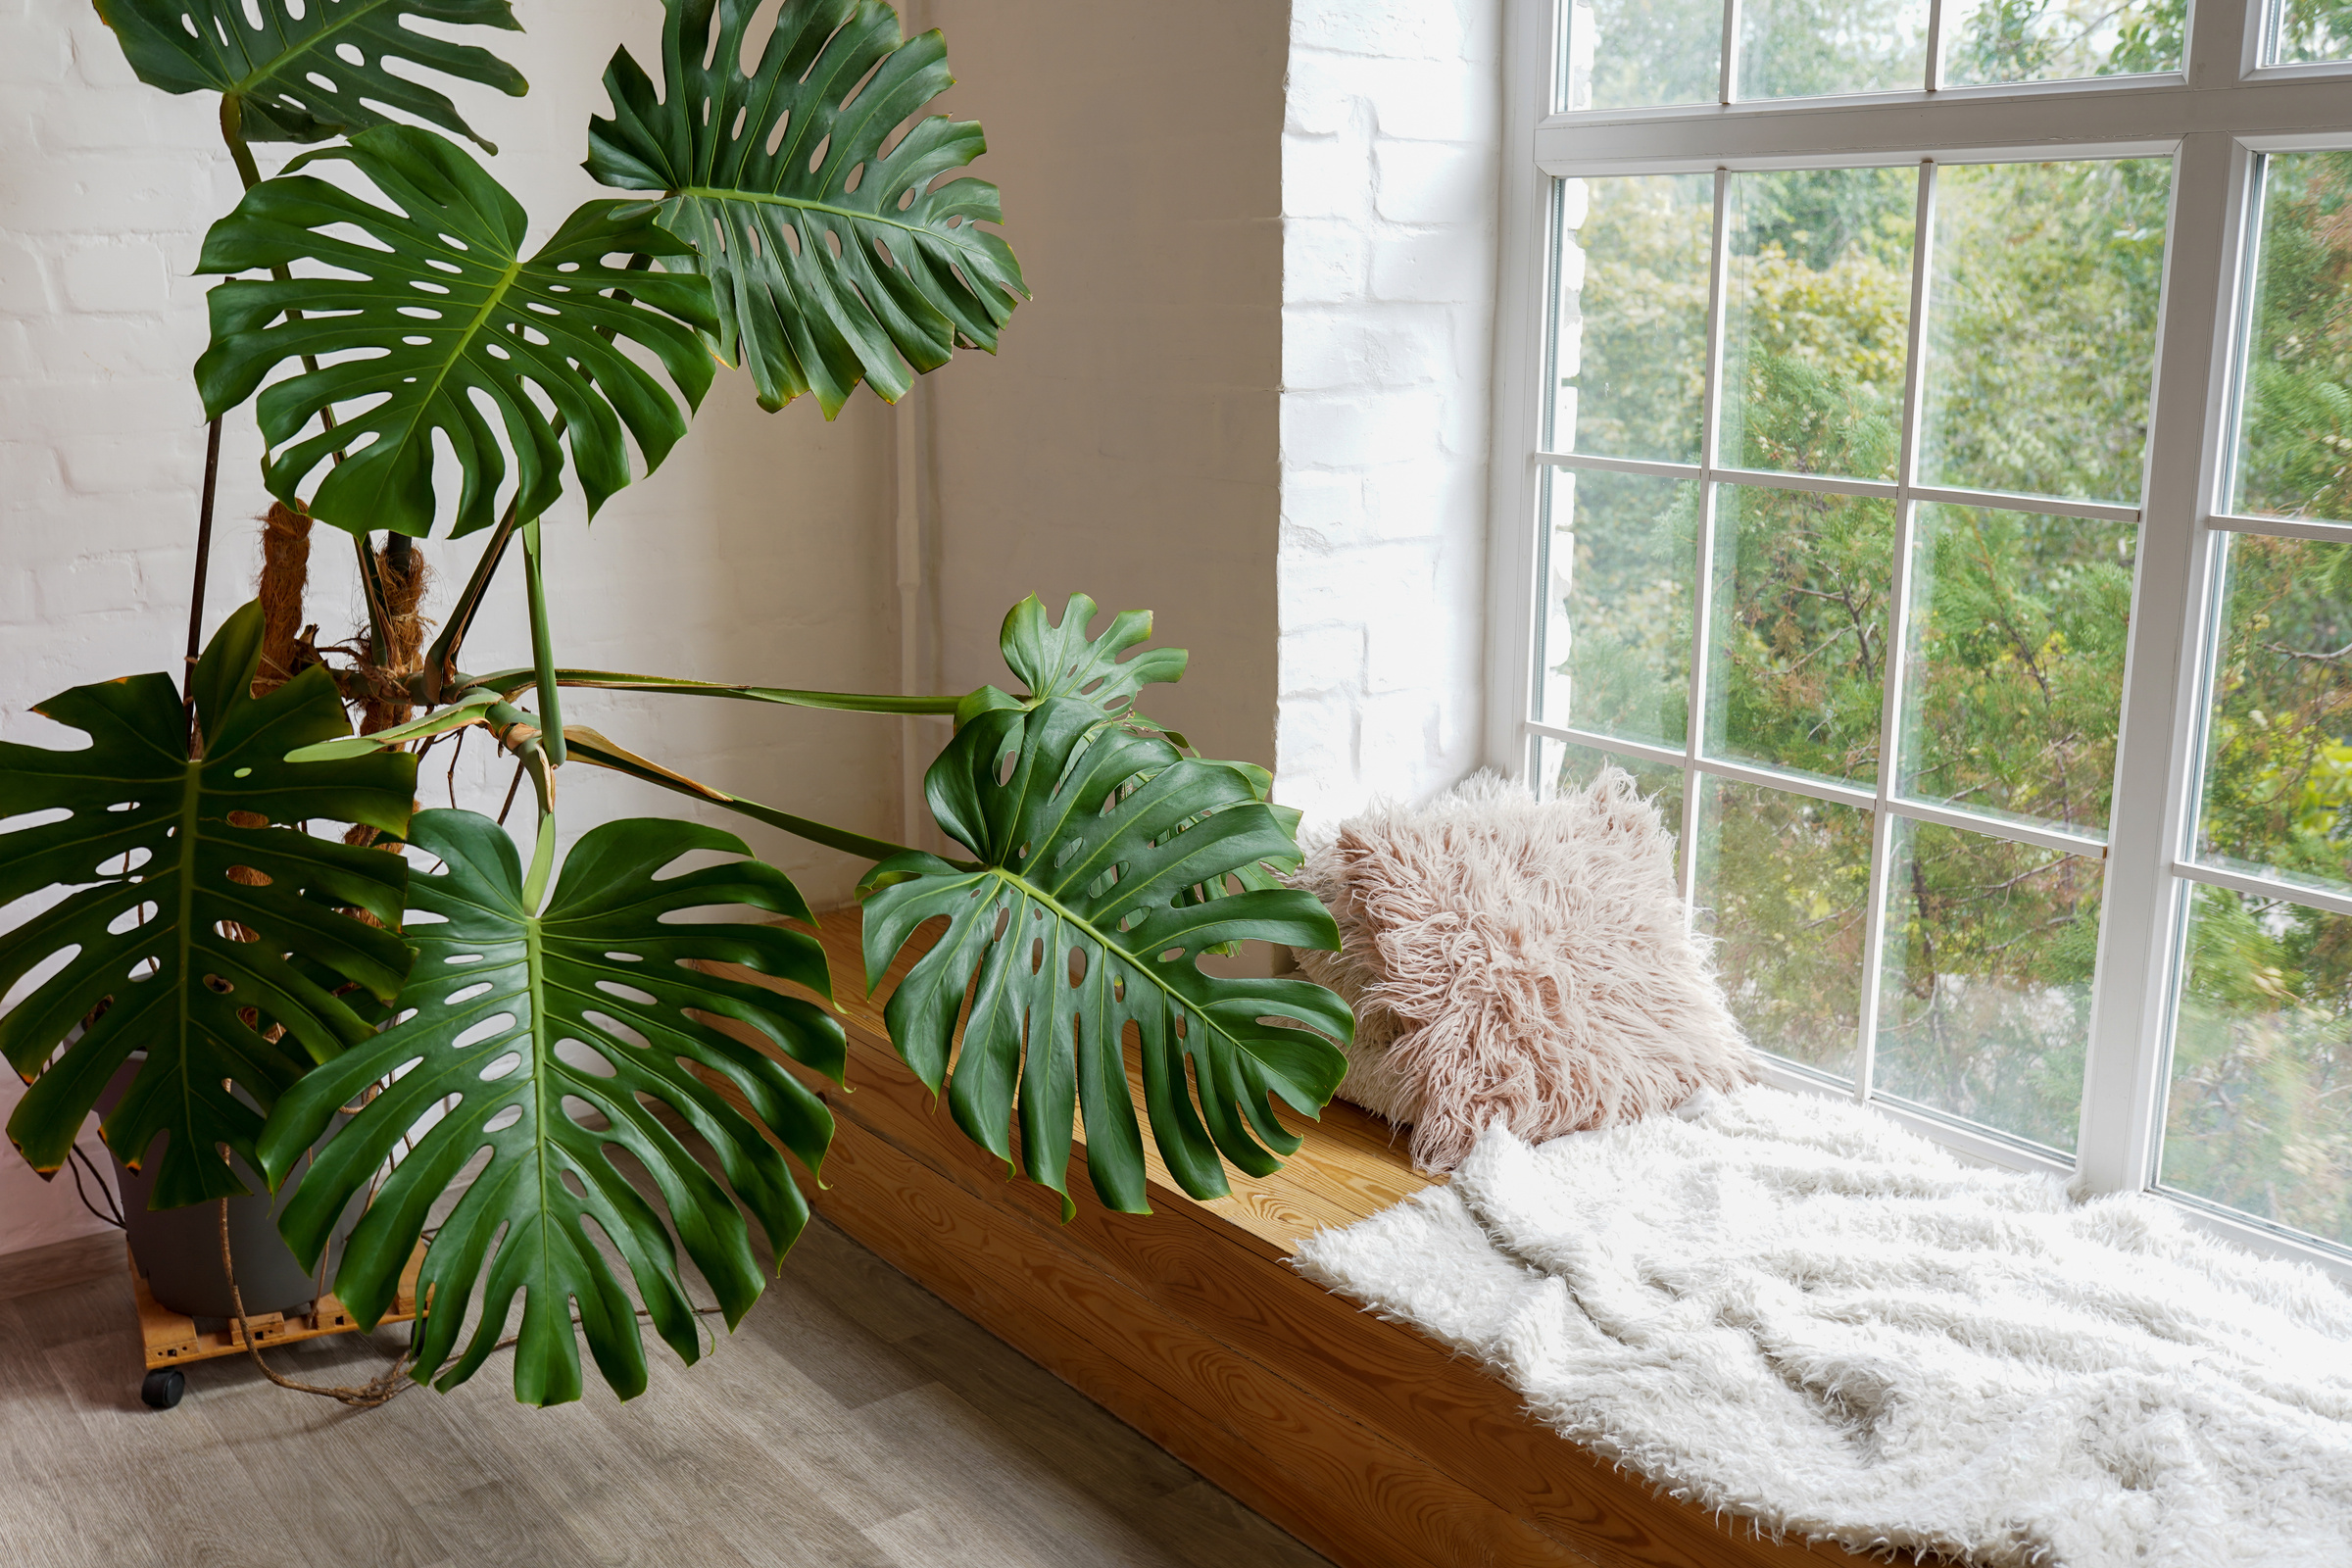 Cozy window sill with monstera and pillows indoors. Plants f